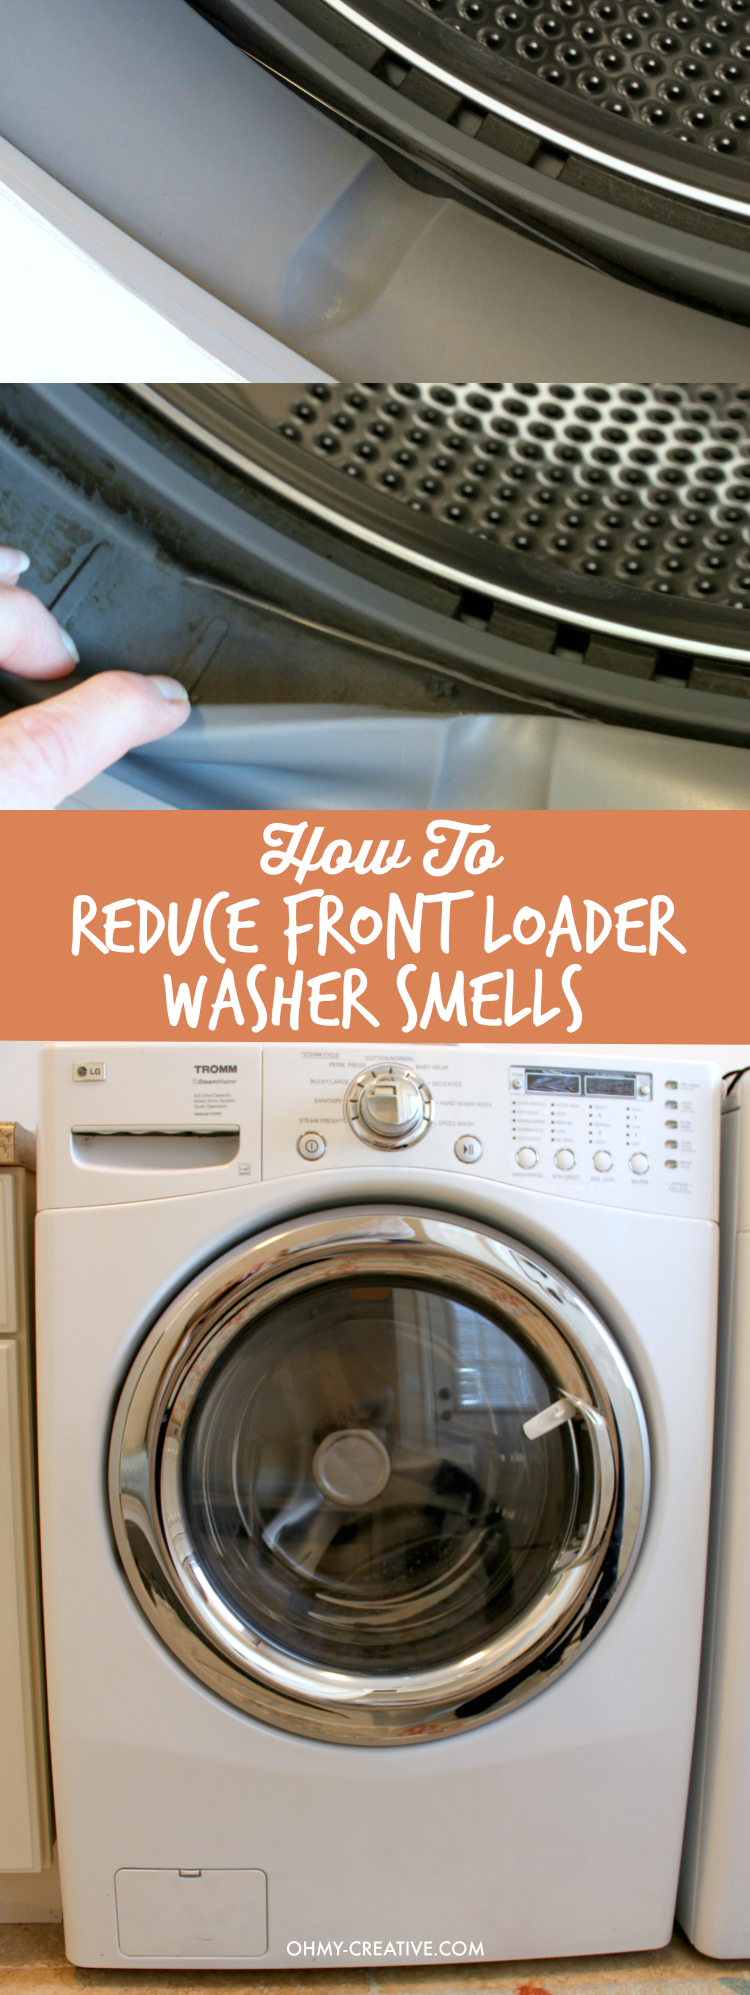 Great washers - awful mildew smell! See my simple tip on How To Reduce Front Loader Washer Smells | OHMY-CREATIVE.COM